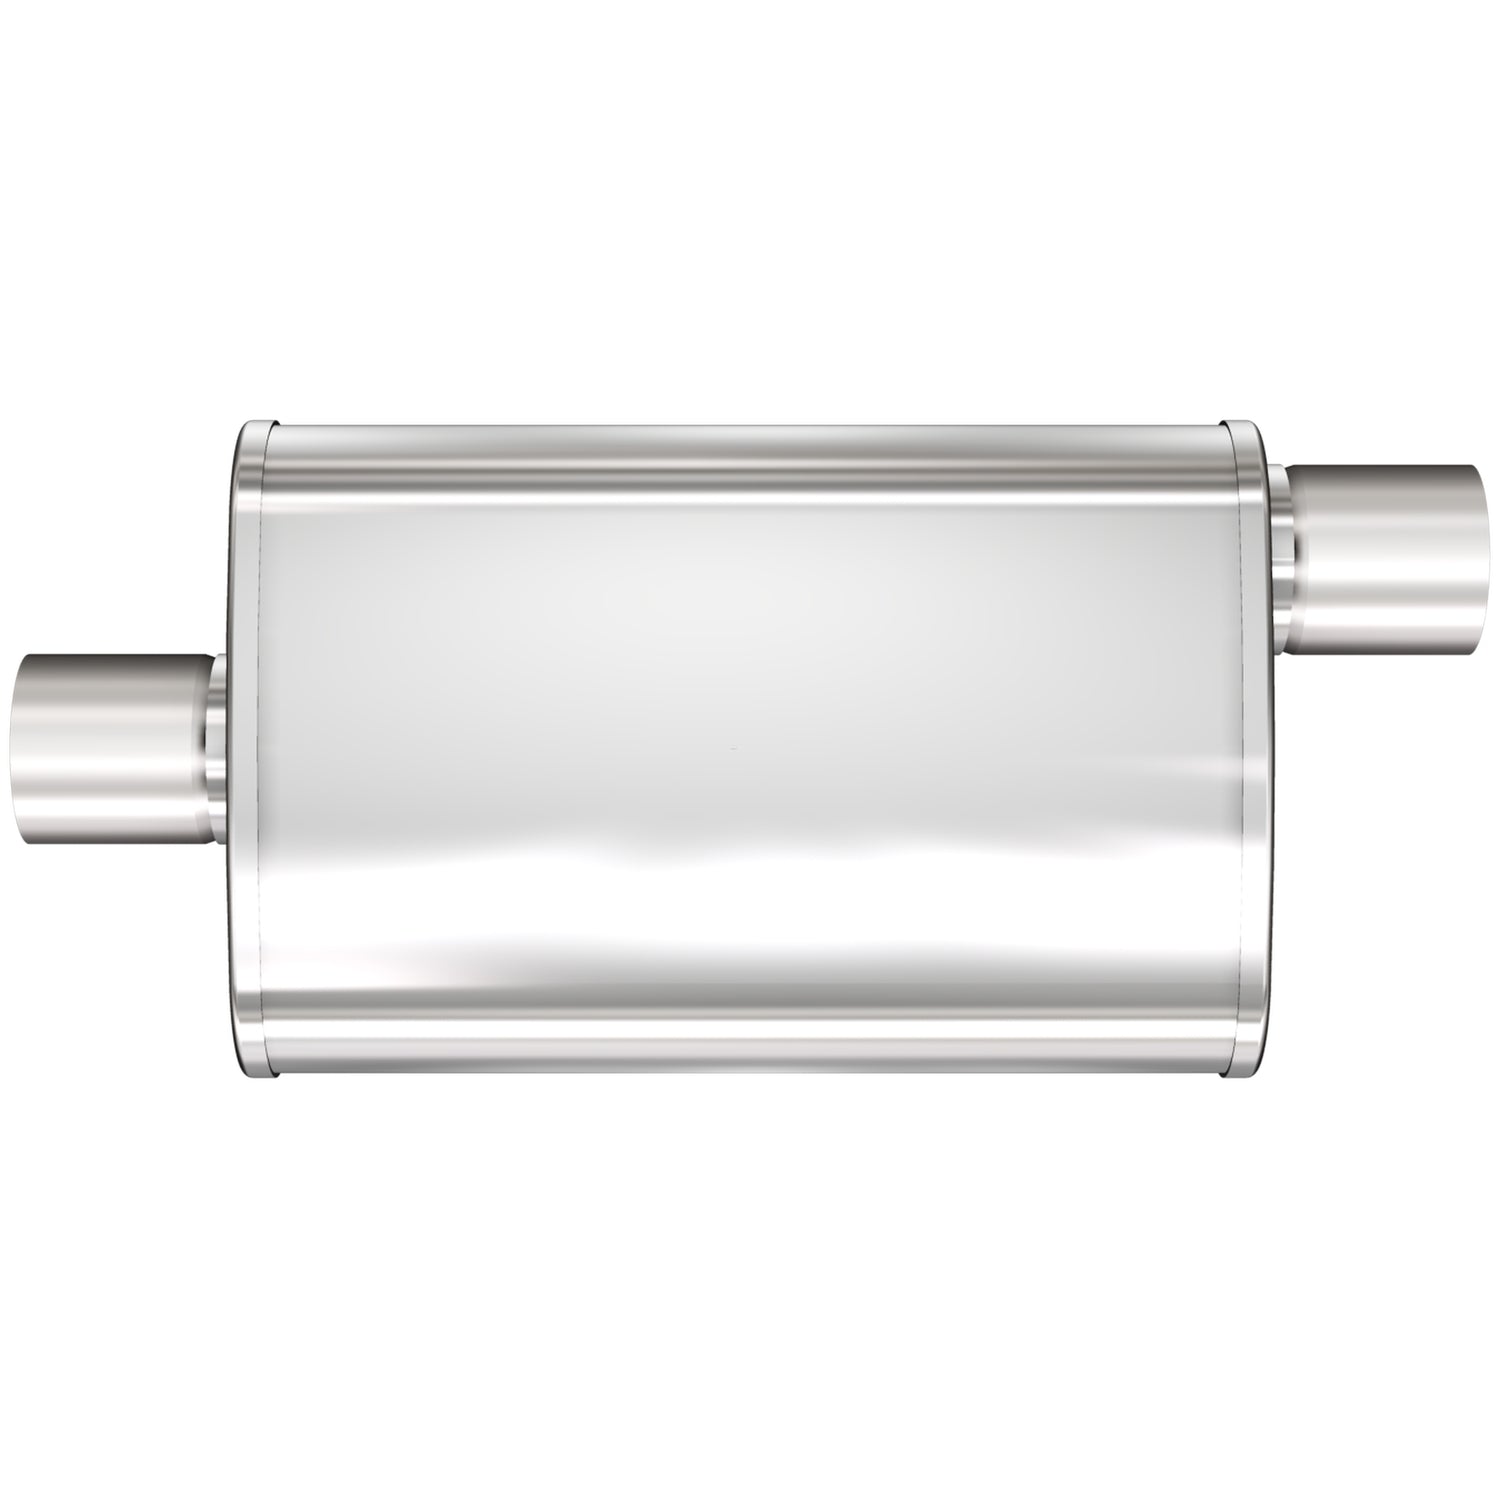 MagnaFlow XL 4 X 9in. Oval Multi-Chamber Performance Exhaust Muffler 13215